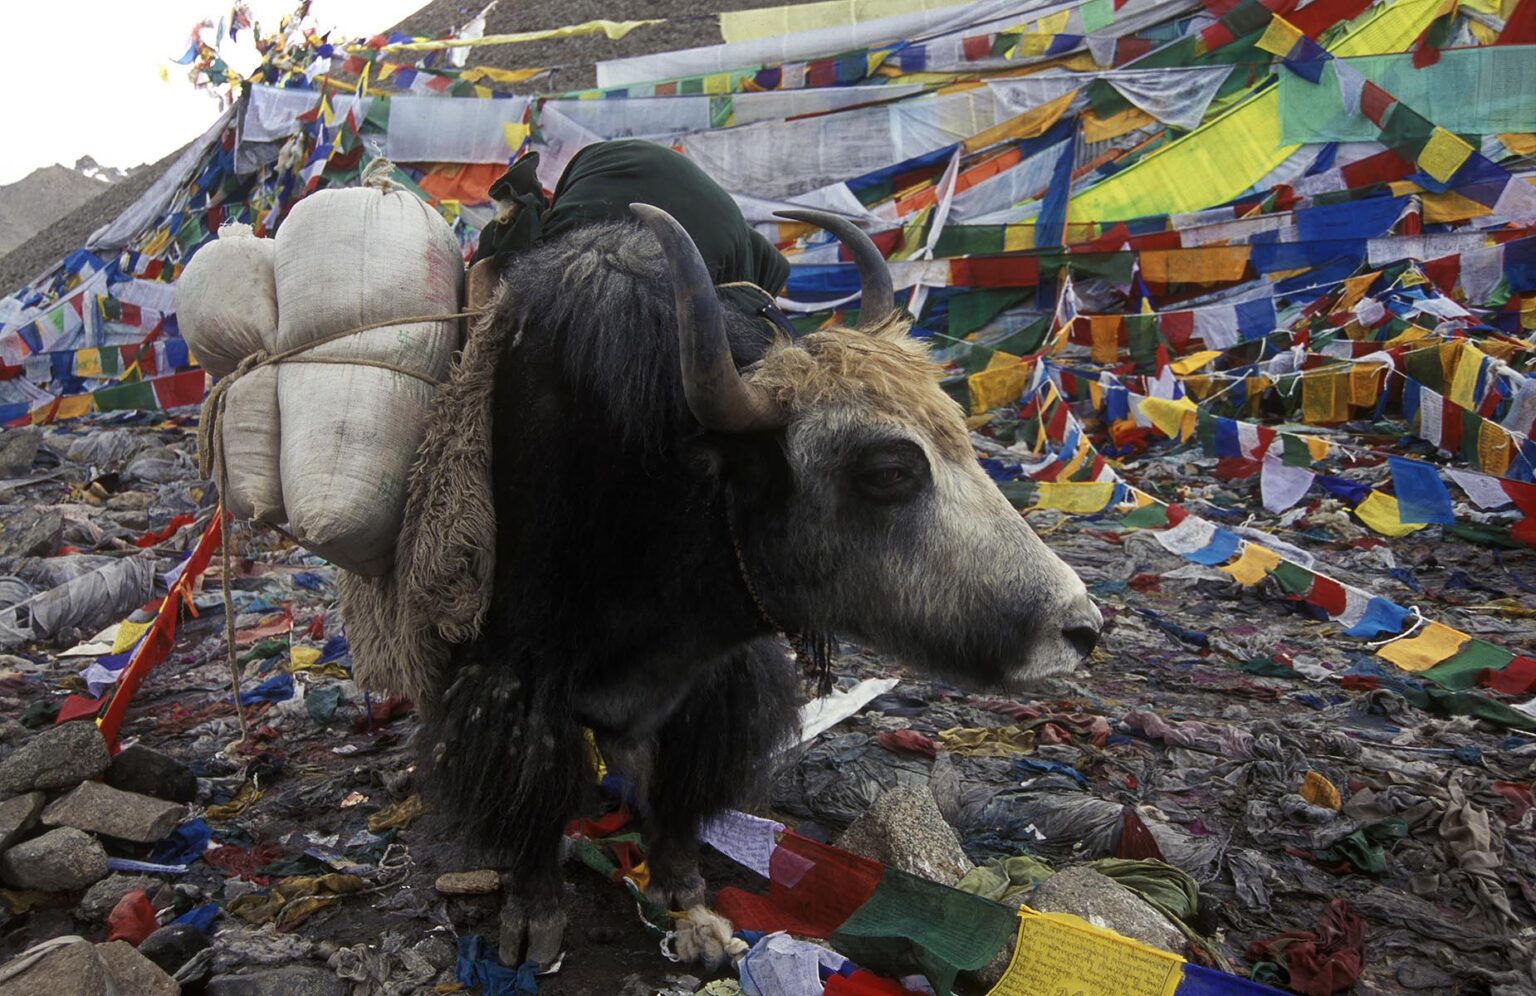 A loaded YAK and PRAYER FLAGS on the DOLMA LA (18,395 ft.), the highest point of the KORA around MOUNT KAILASH, TIBET